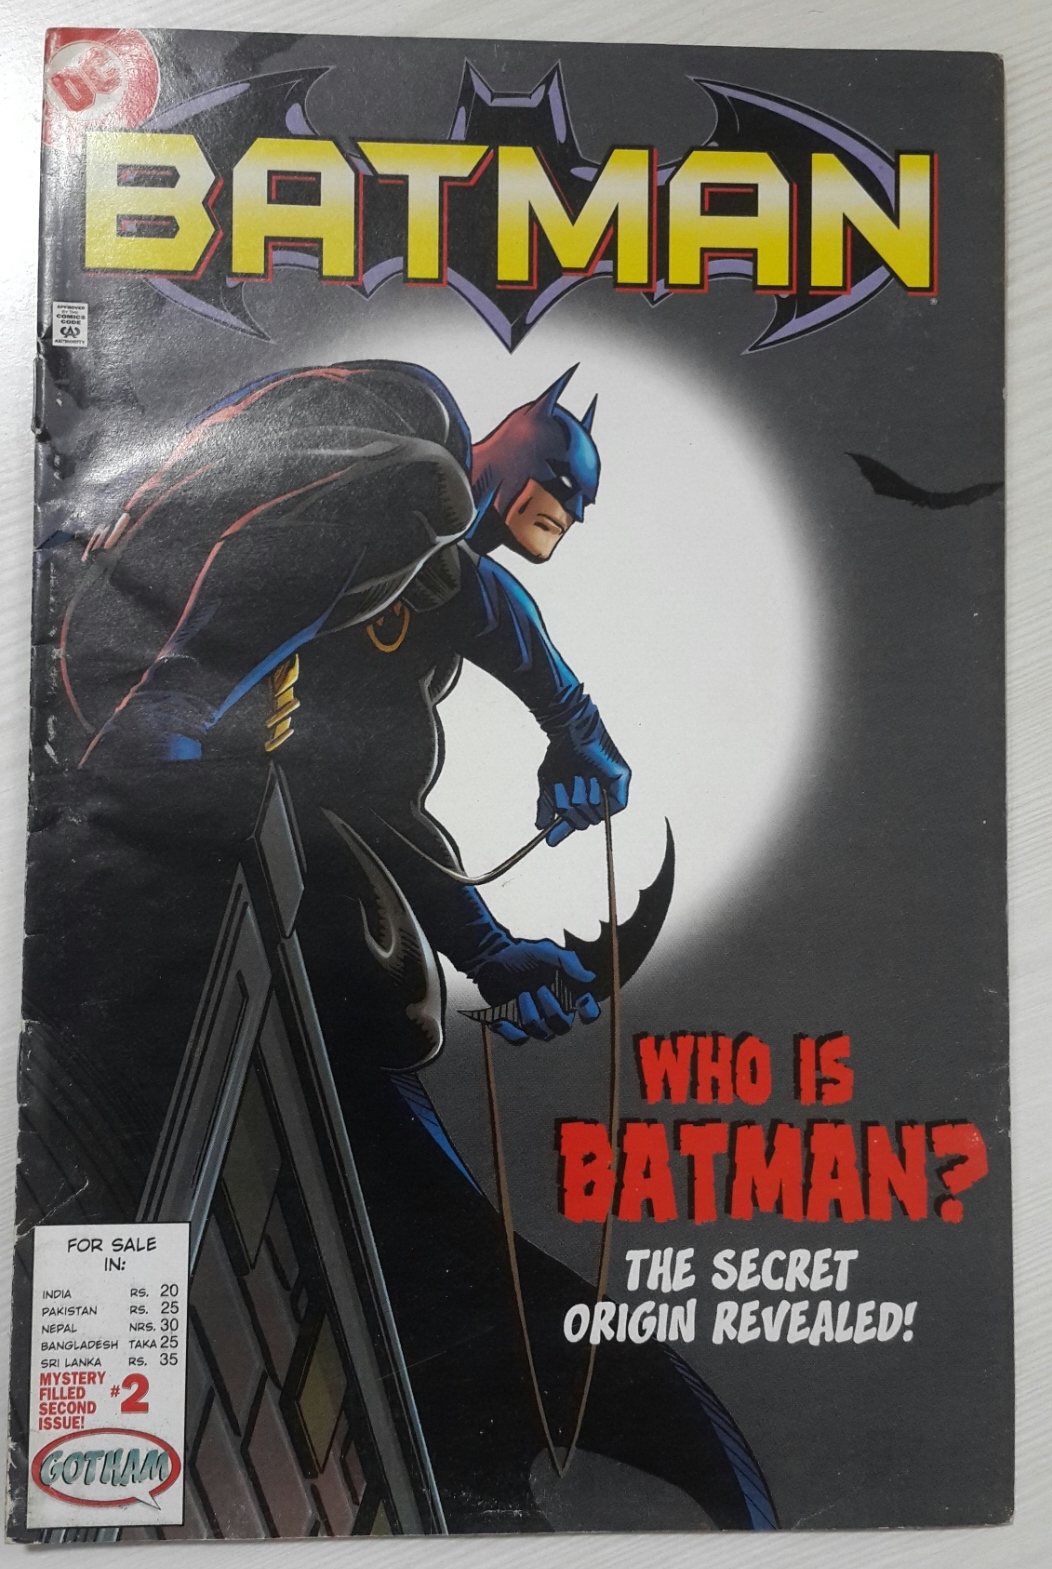 Comic Book Review – Exclusively on Shalzmojo.in